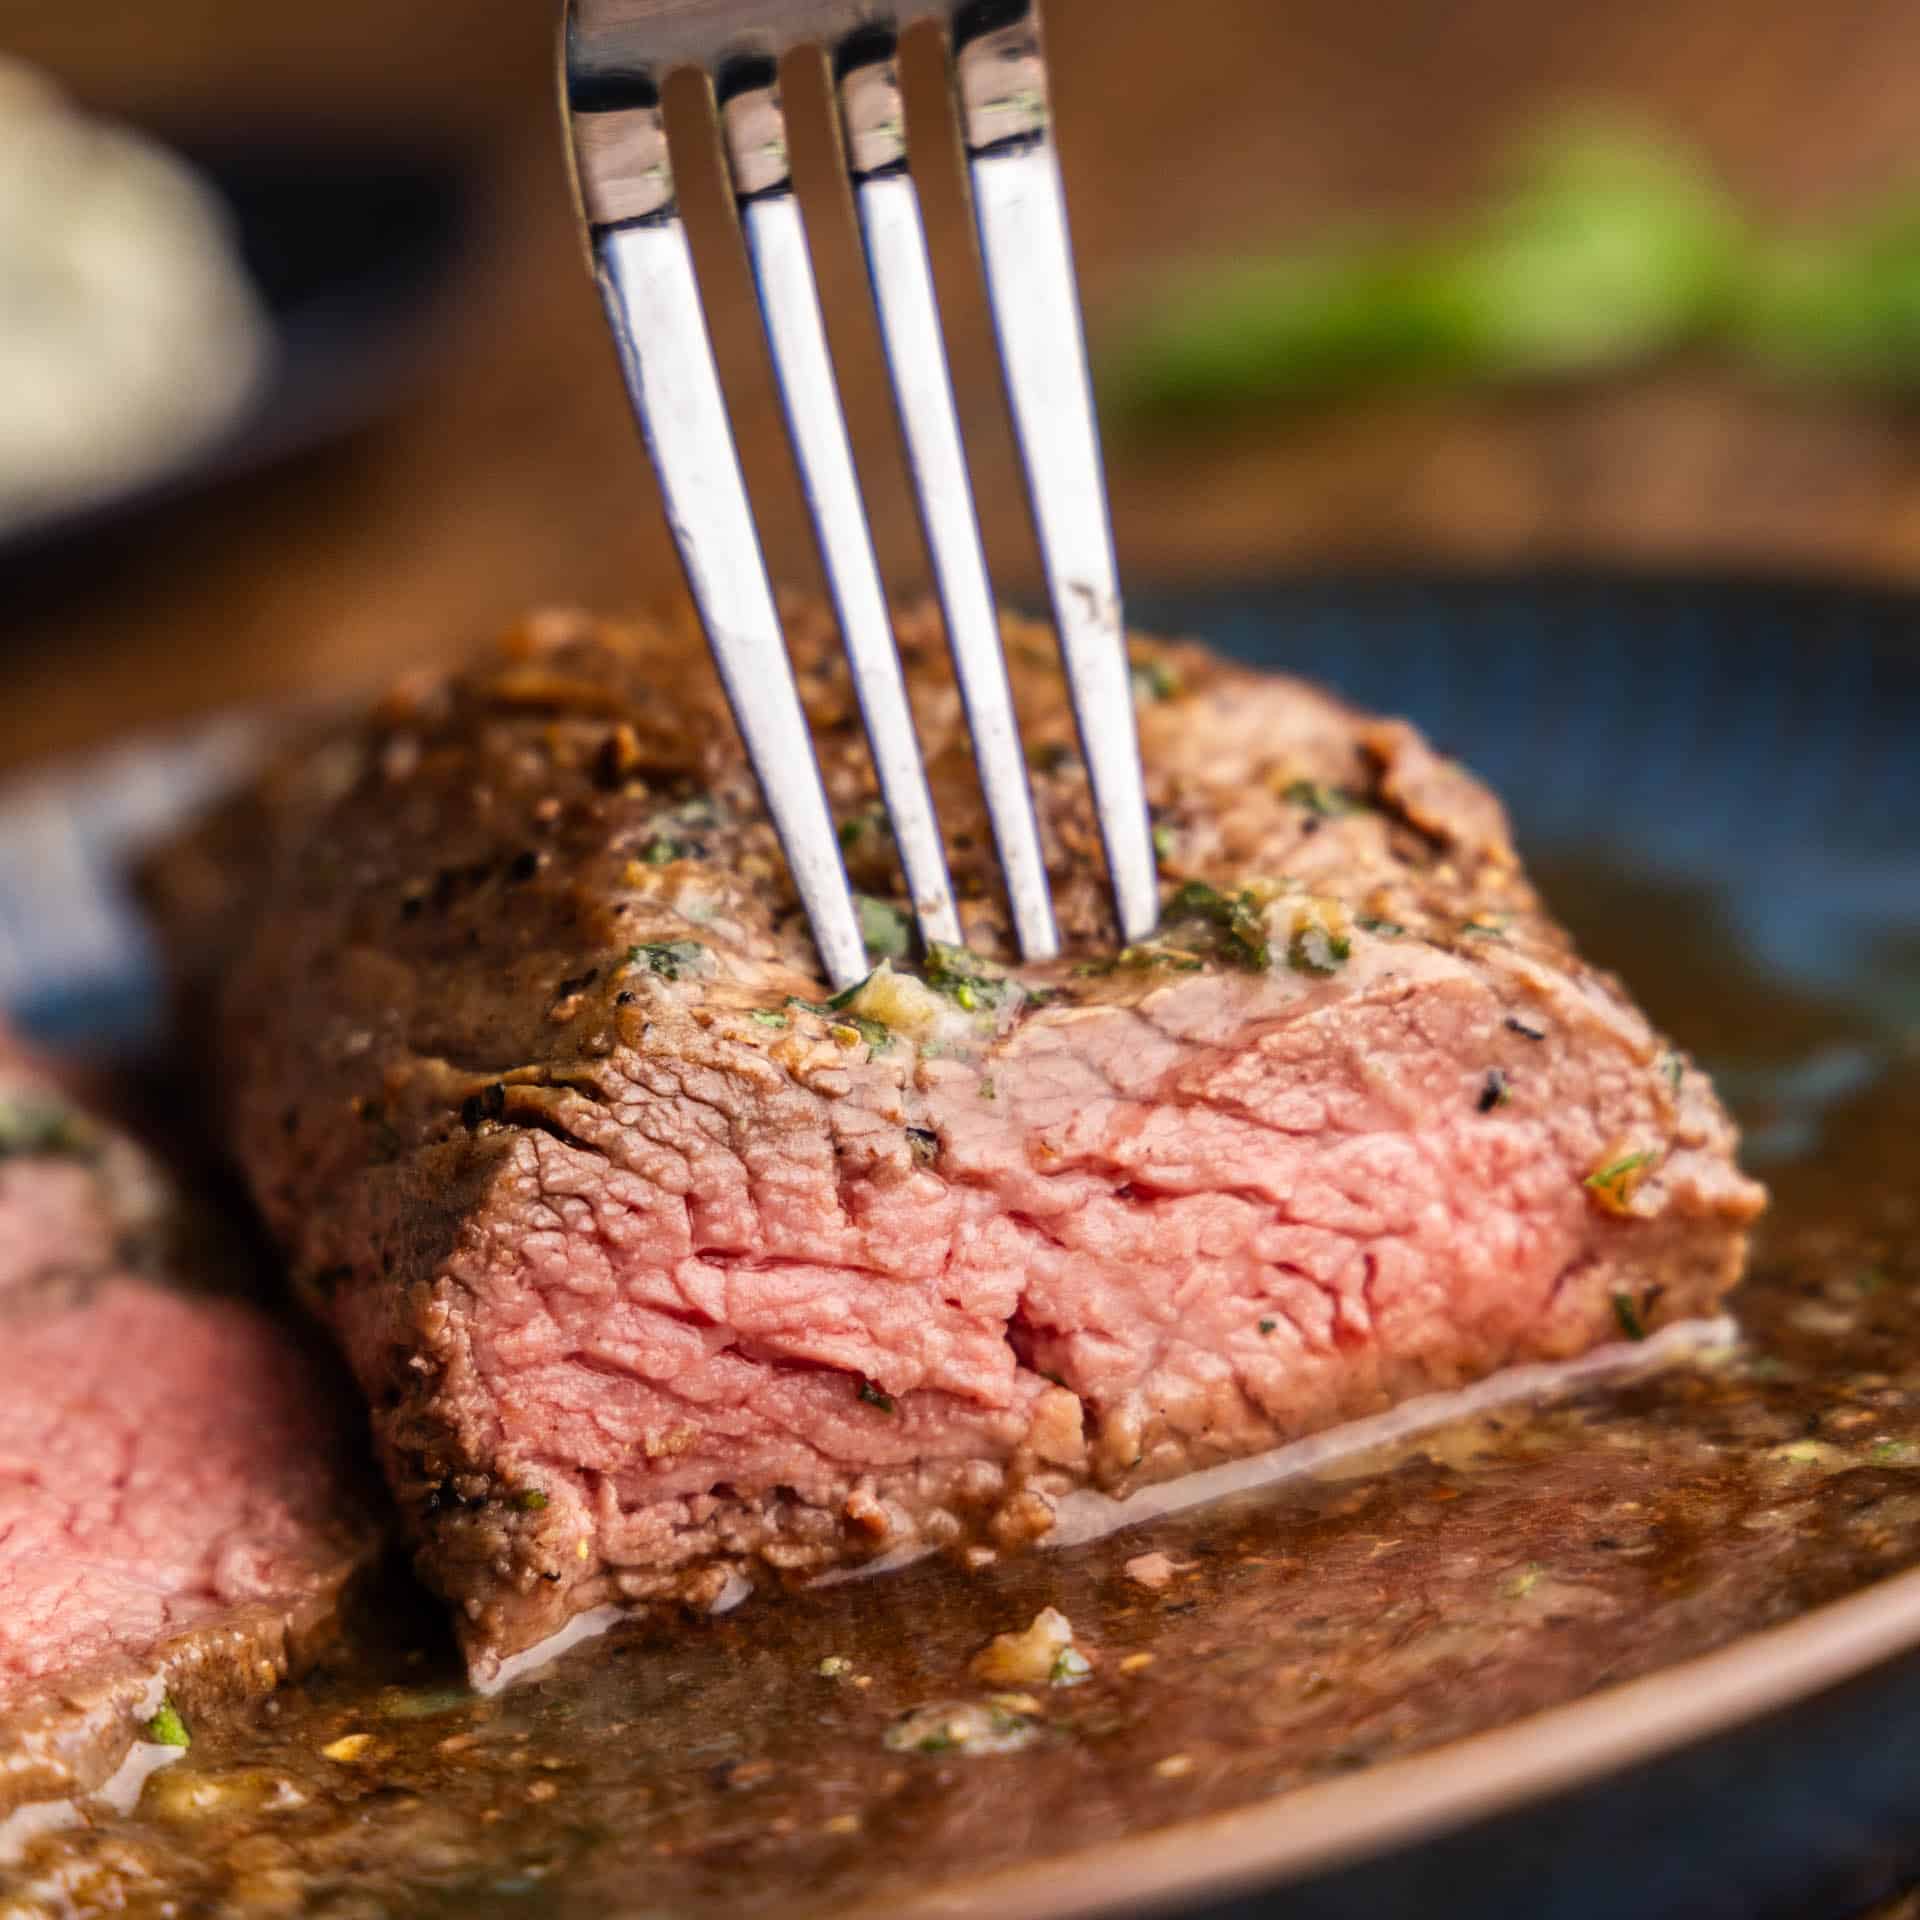 A close up view of a petite tender steak that has already been cut into showing a perfectly pink interior with a fork poking in the top to pick up a piece.